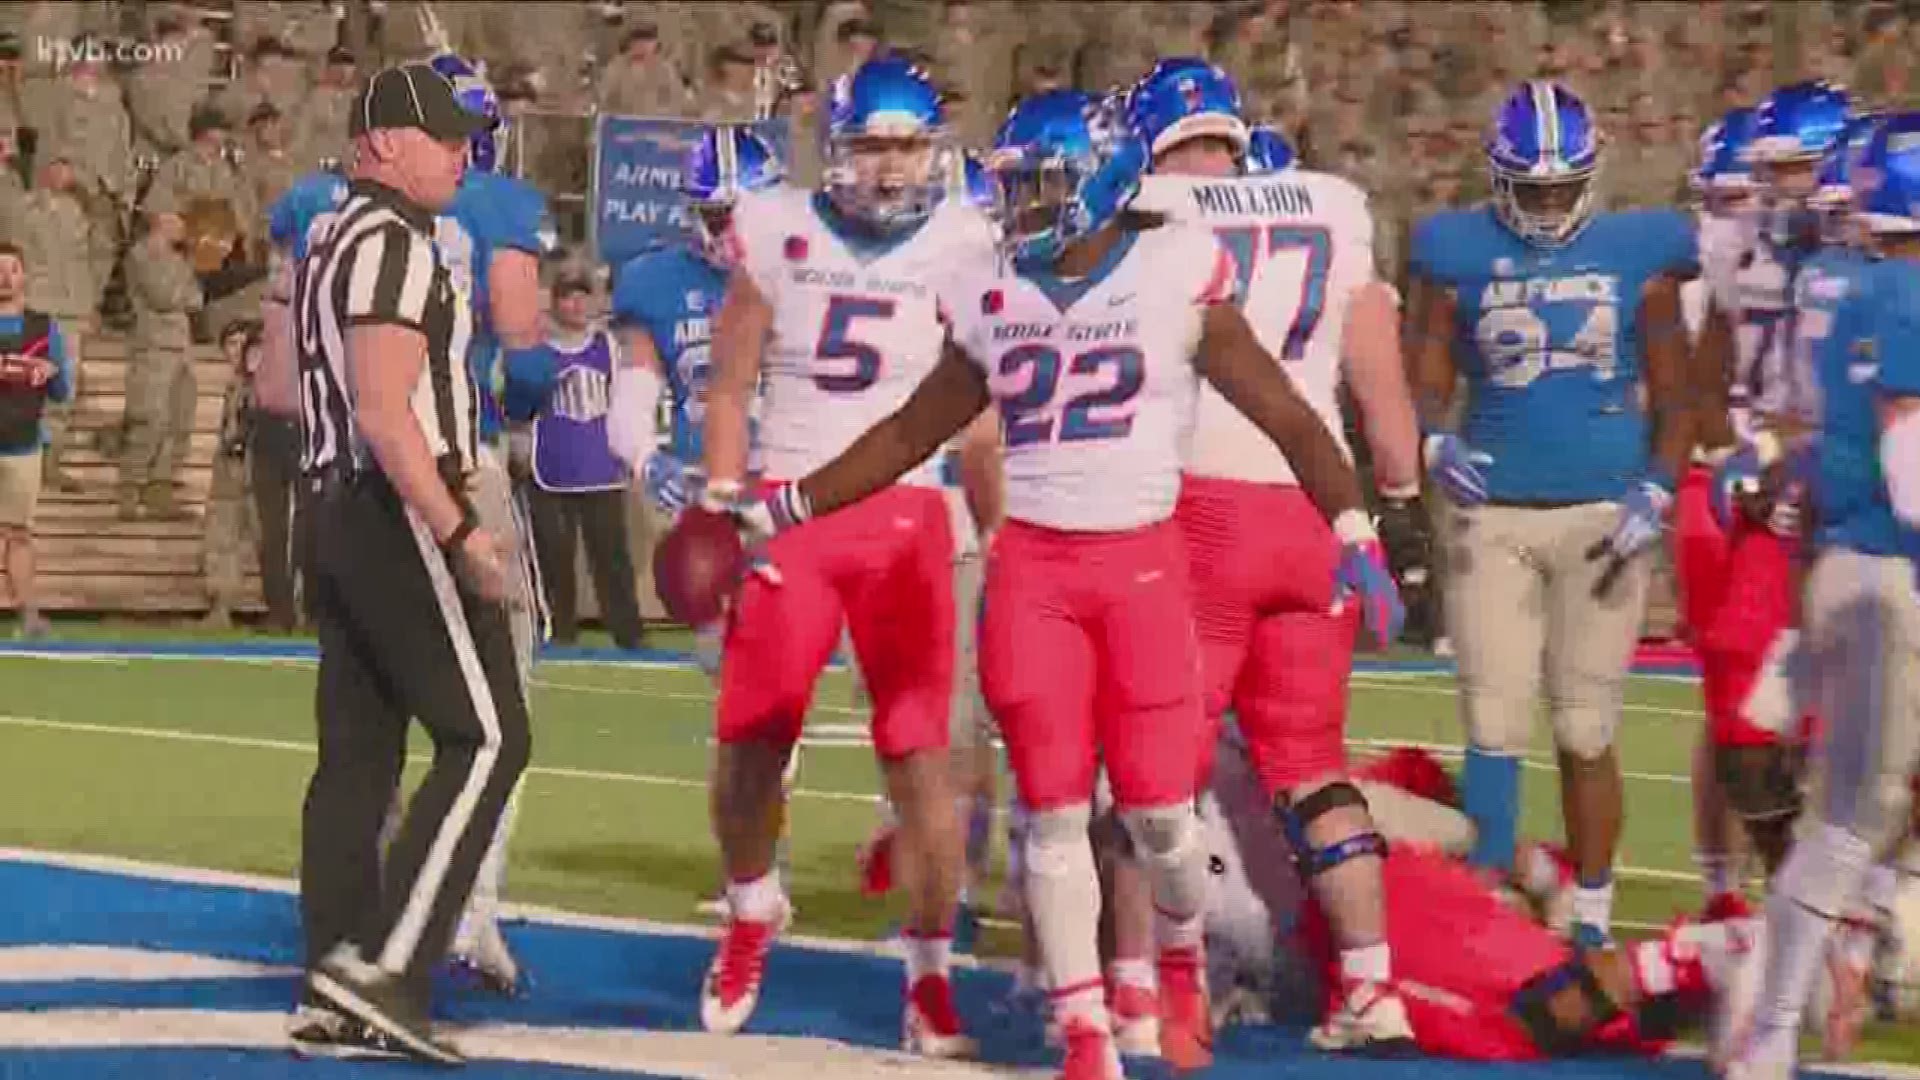 Highlights from Boise State's 48-38 win over Air Force at Colorado Springs on Oct 27.